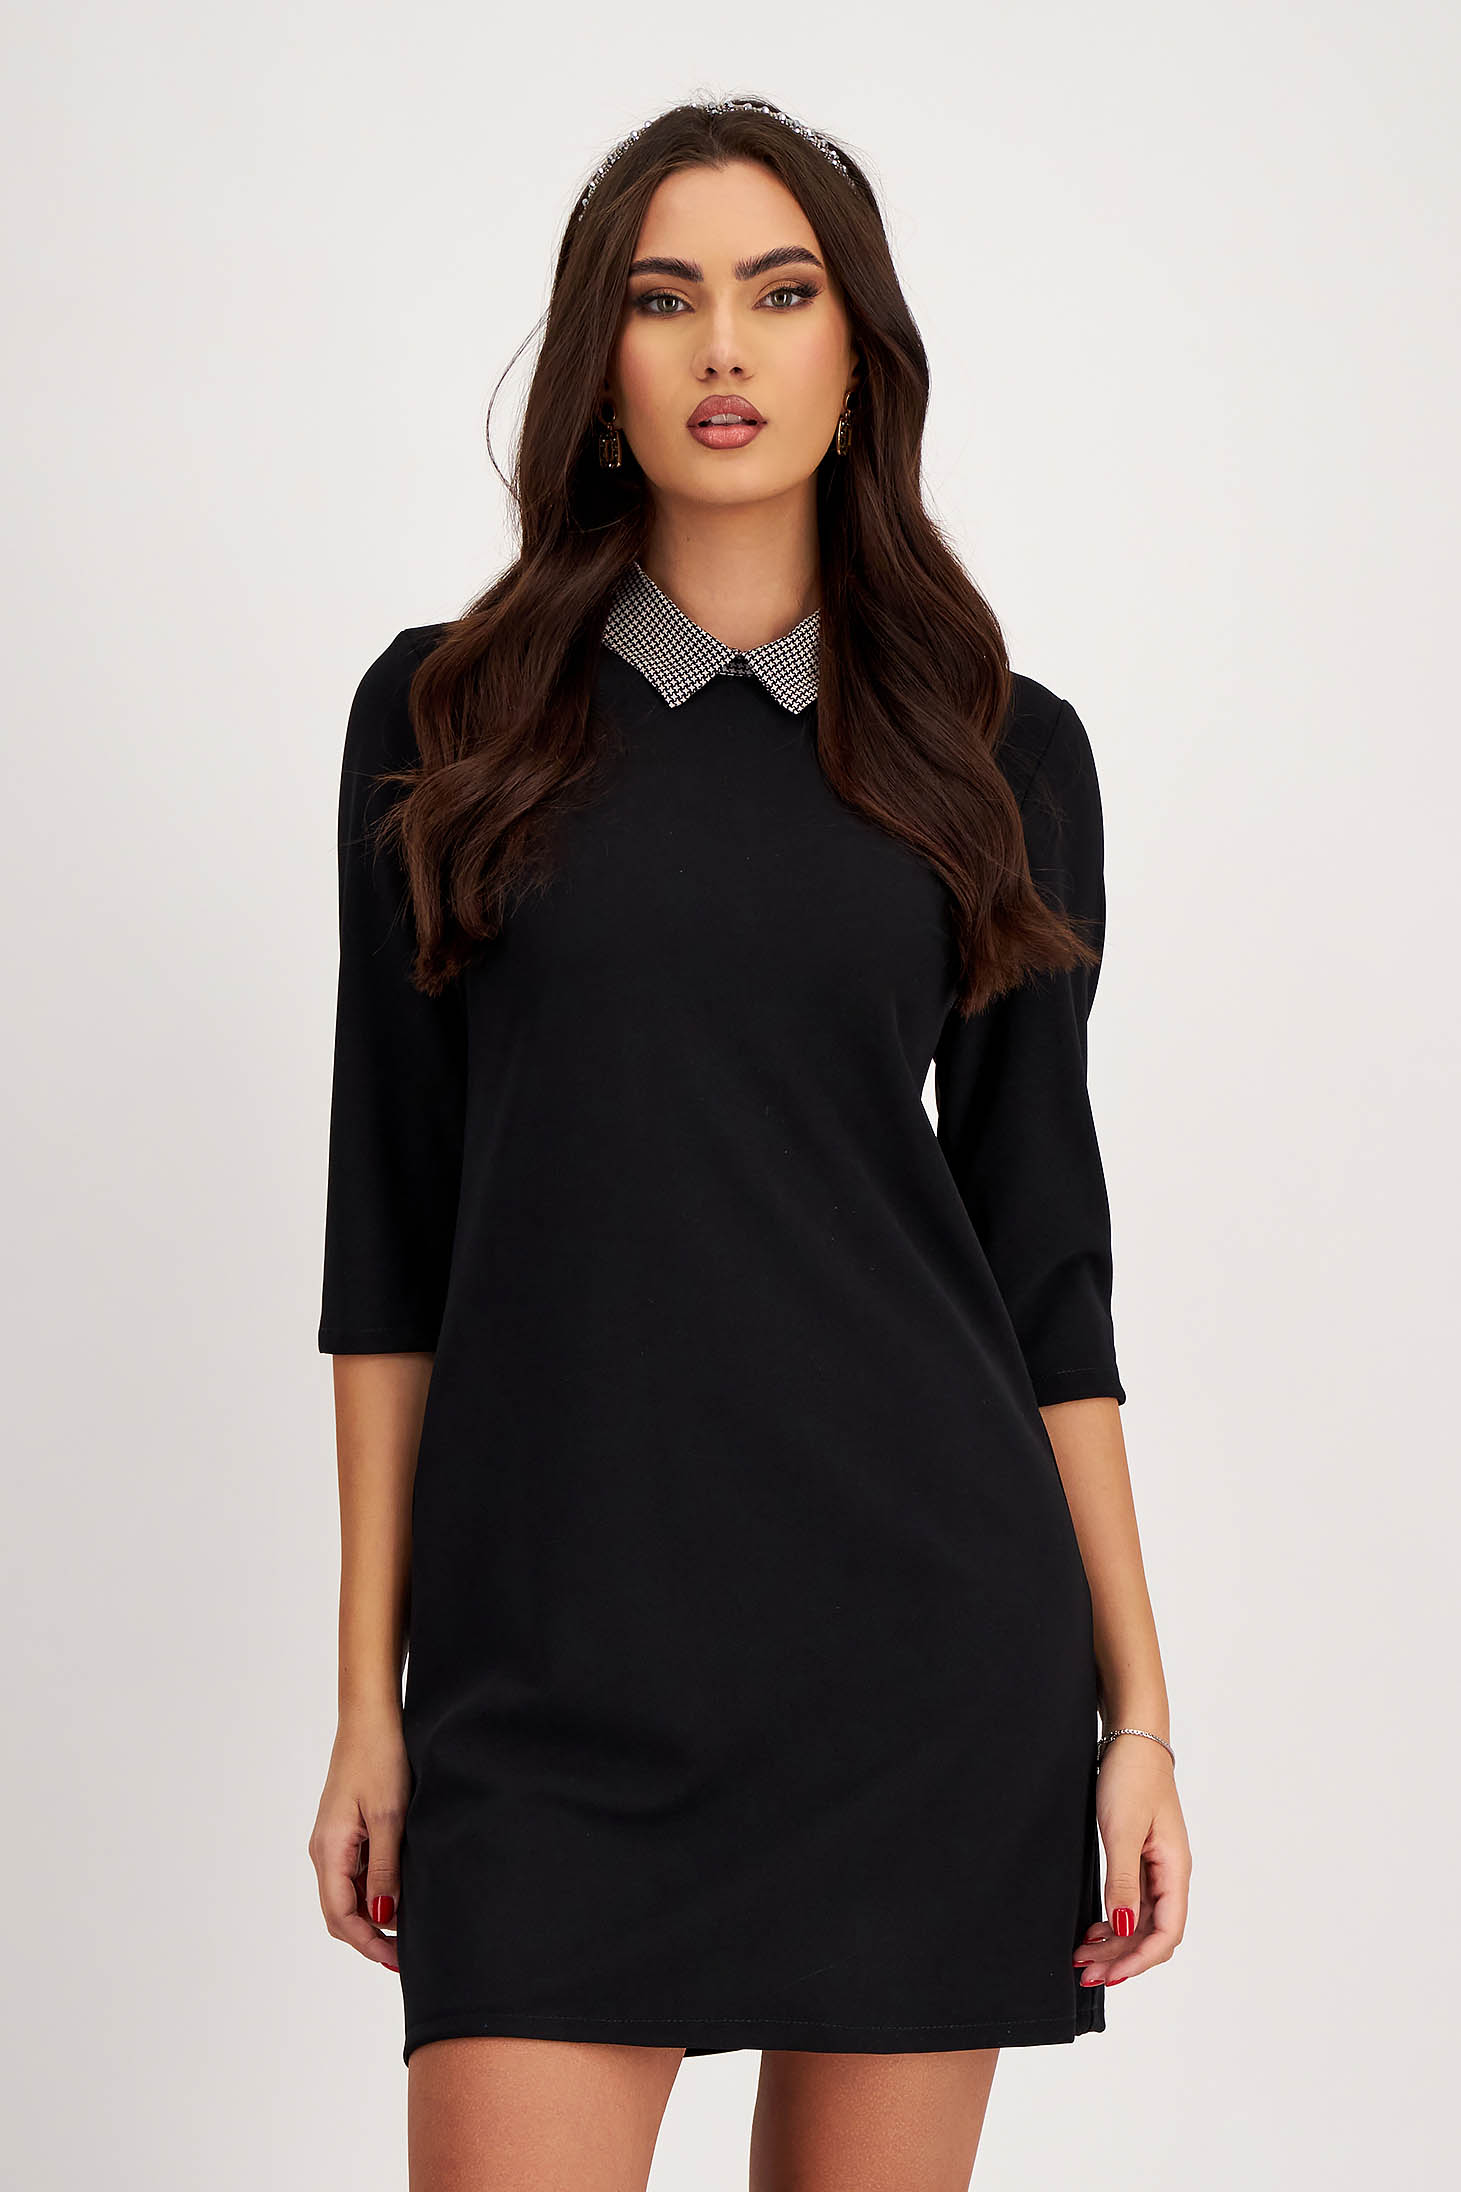 Black elastic material dress with A-line cut and plaid collar - SunShine